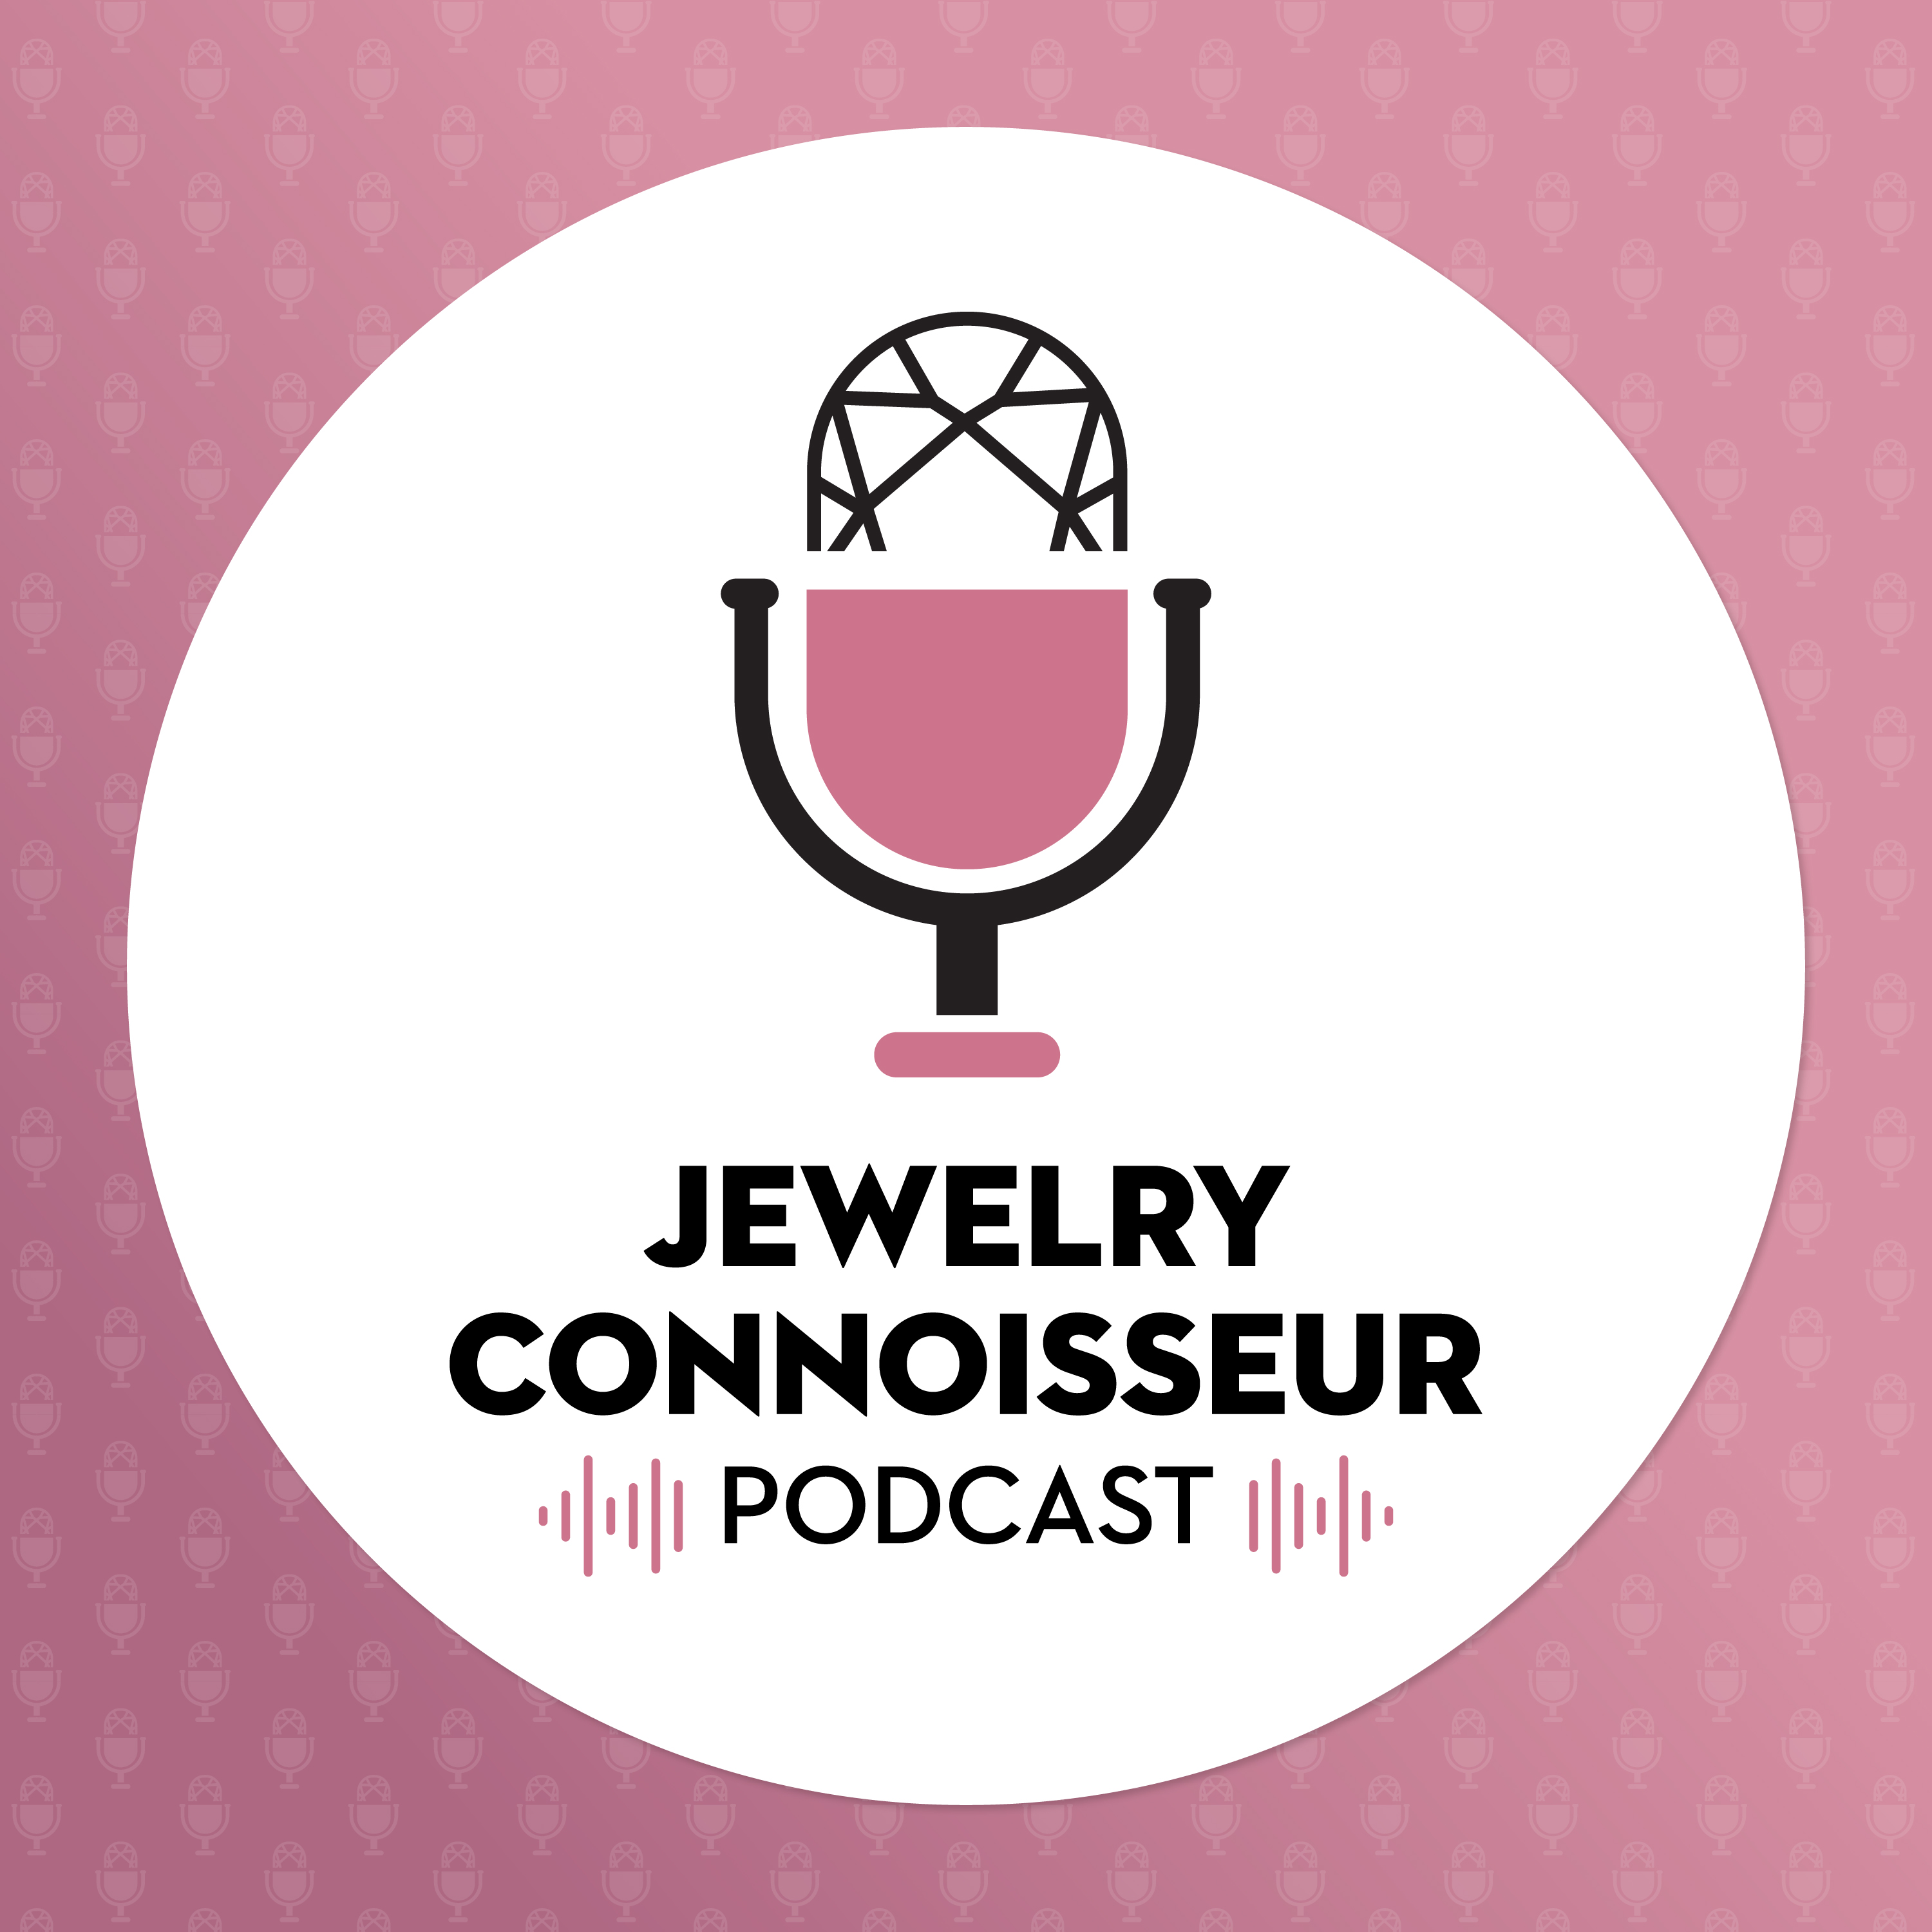 Artwork for podcast Jewelry Connoisseur